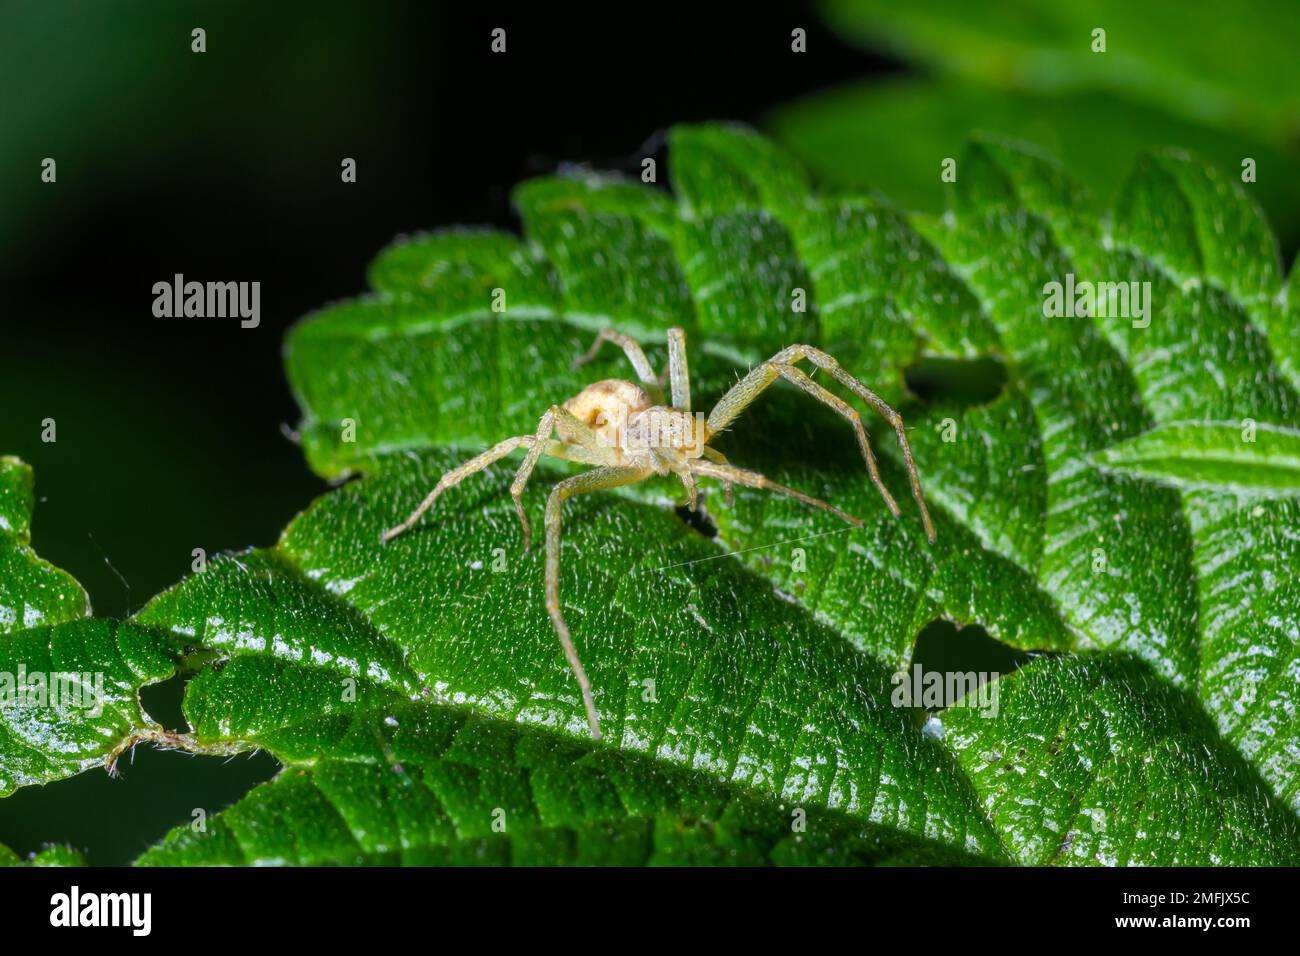 Spider Misumena vatia goldenrod crab spider or flower is a species of crab spider with holarctic distribution, belongs to the family Thomisidae. Stock Photo